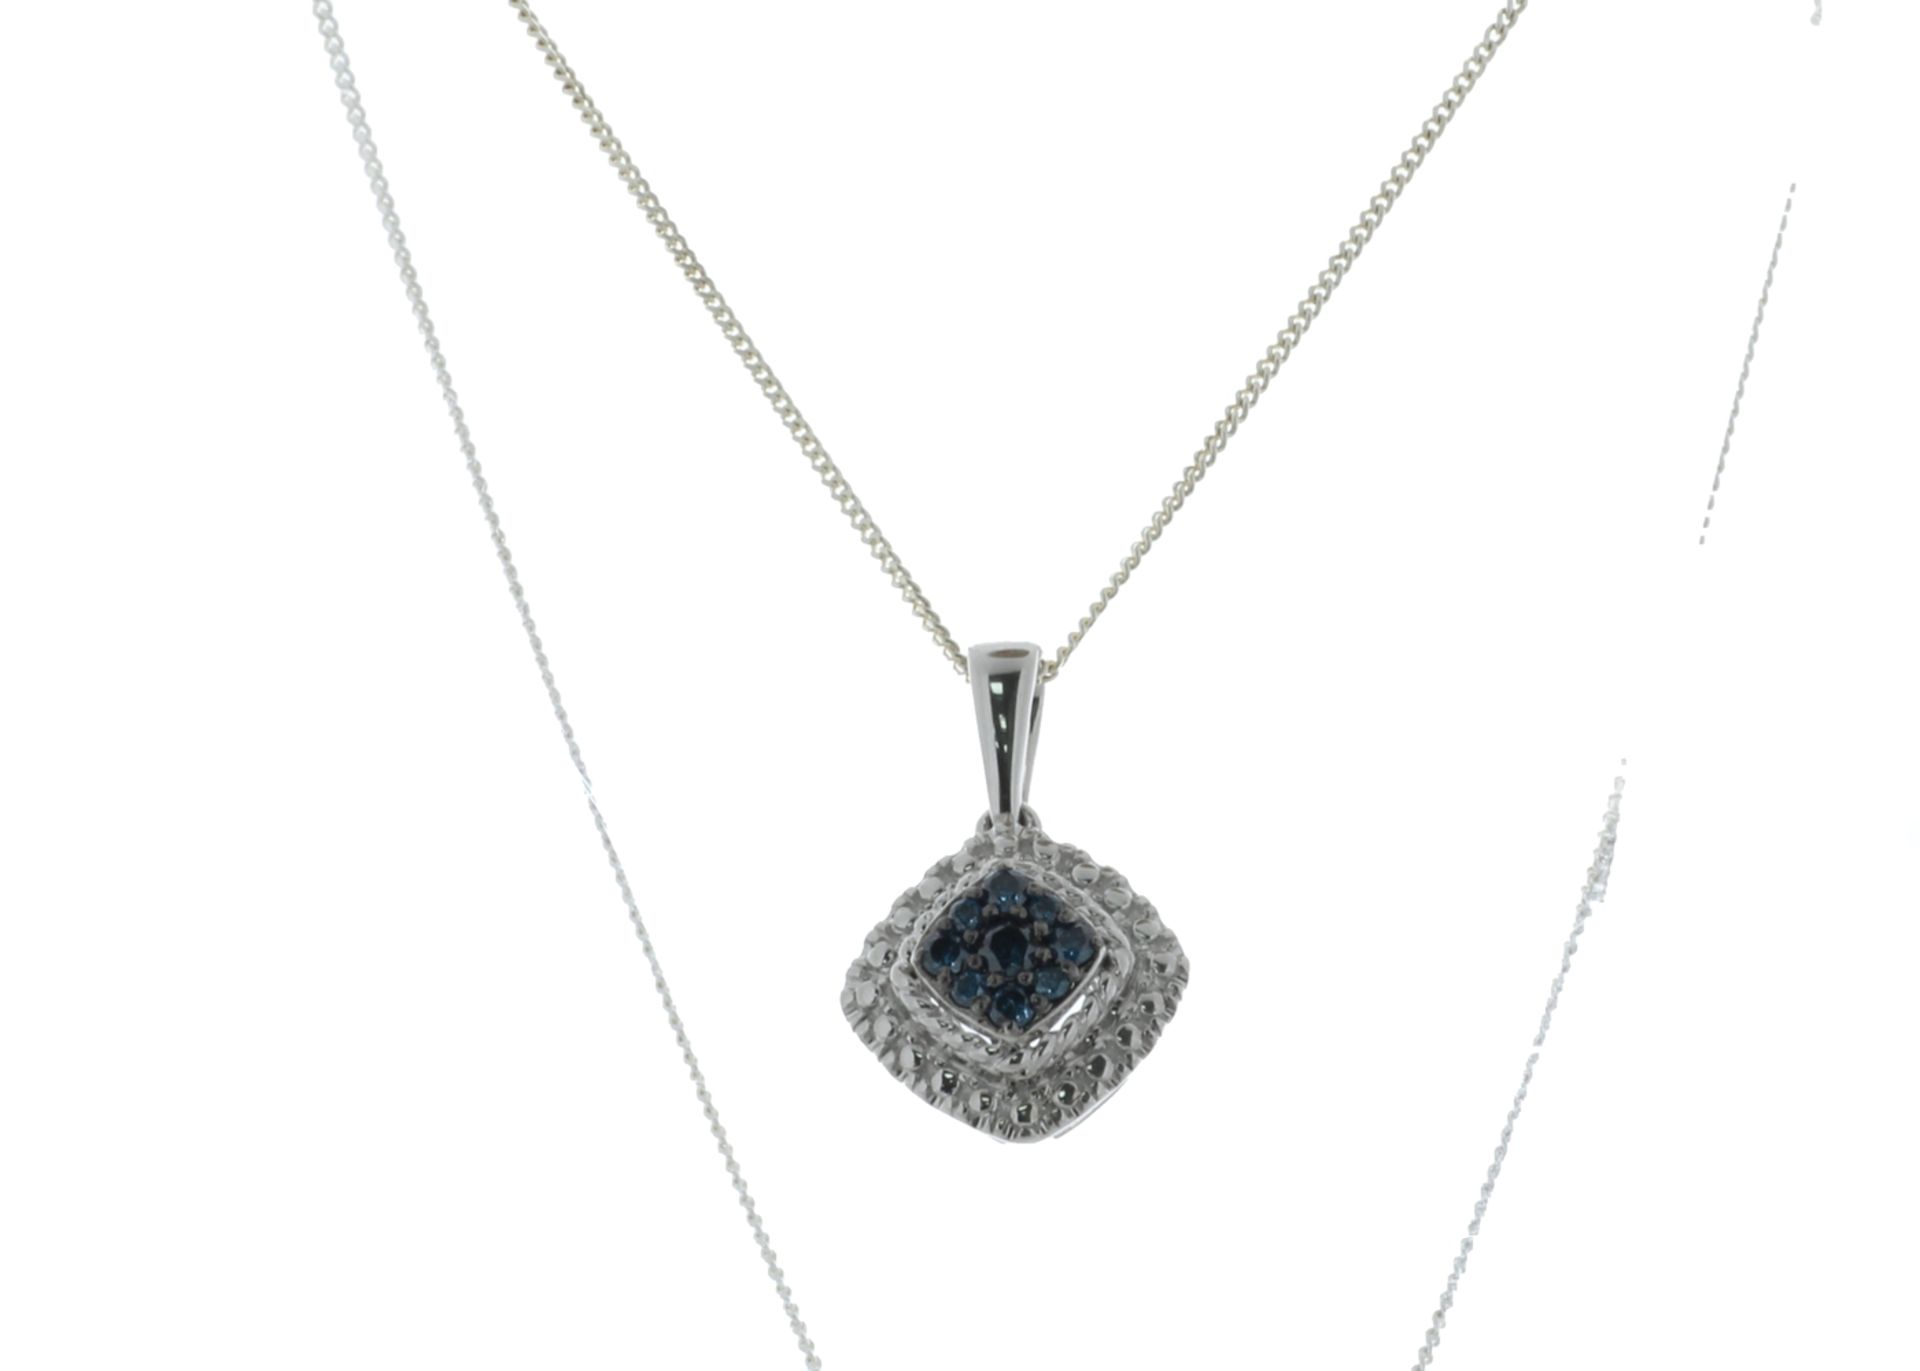 9ct White Gold Diamond Pendant 0.15 Carats - Valued By GIE £1,775.00 - A vibrant 9ct white gold